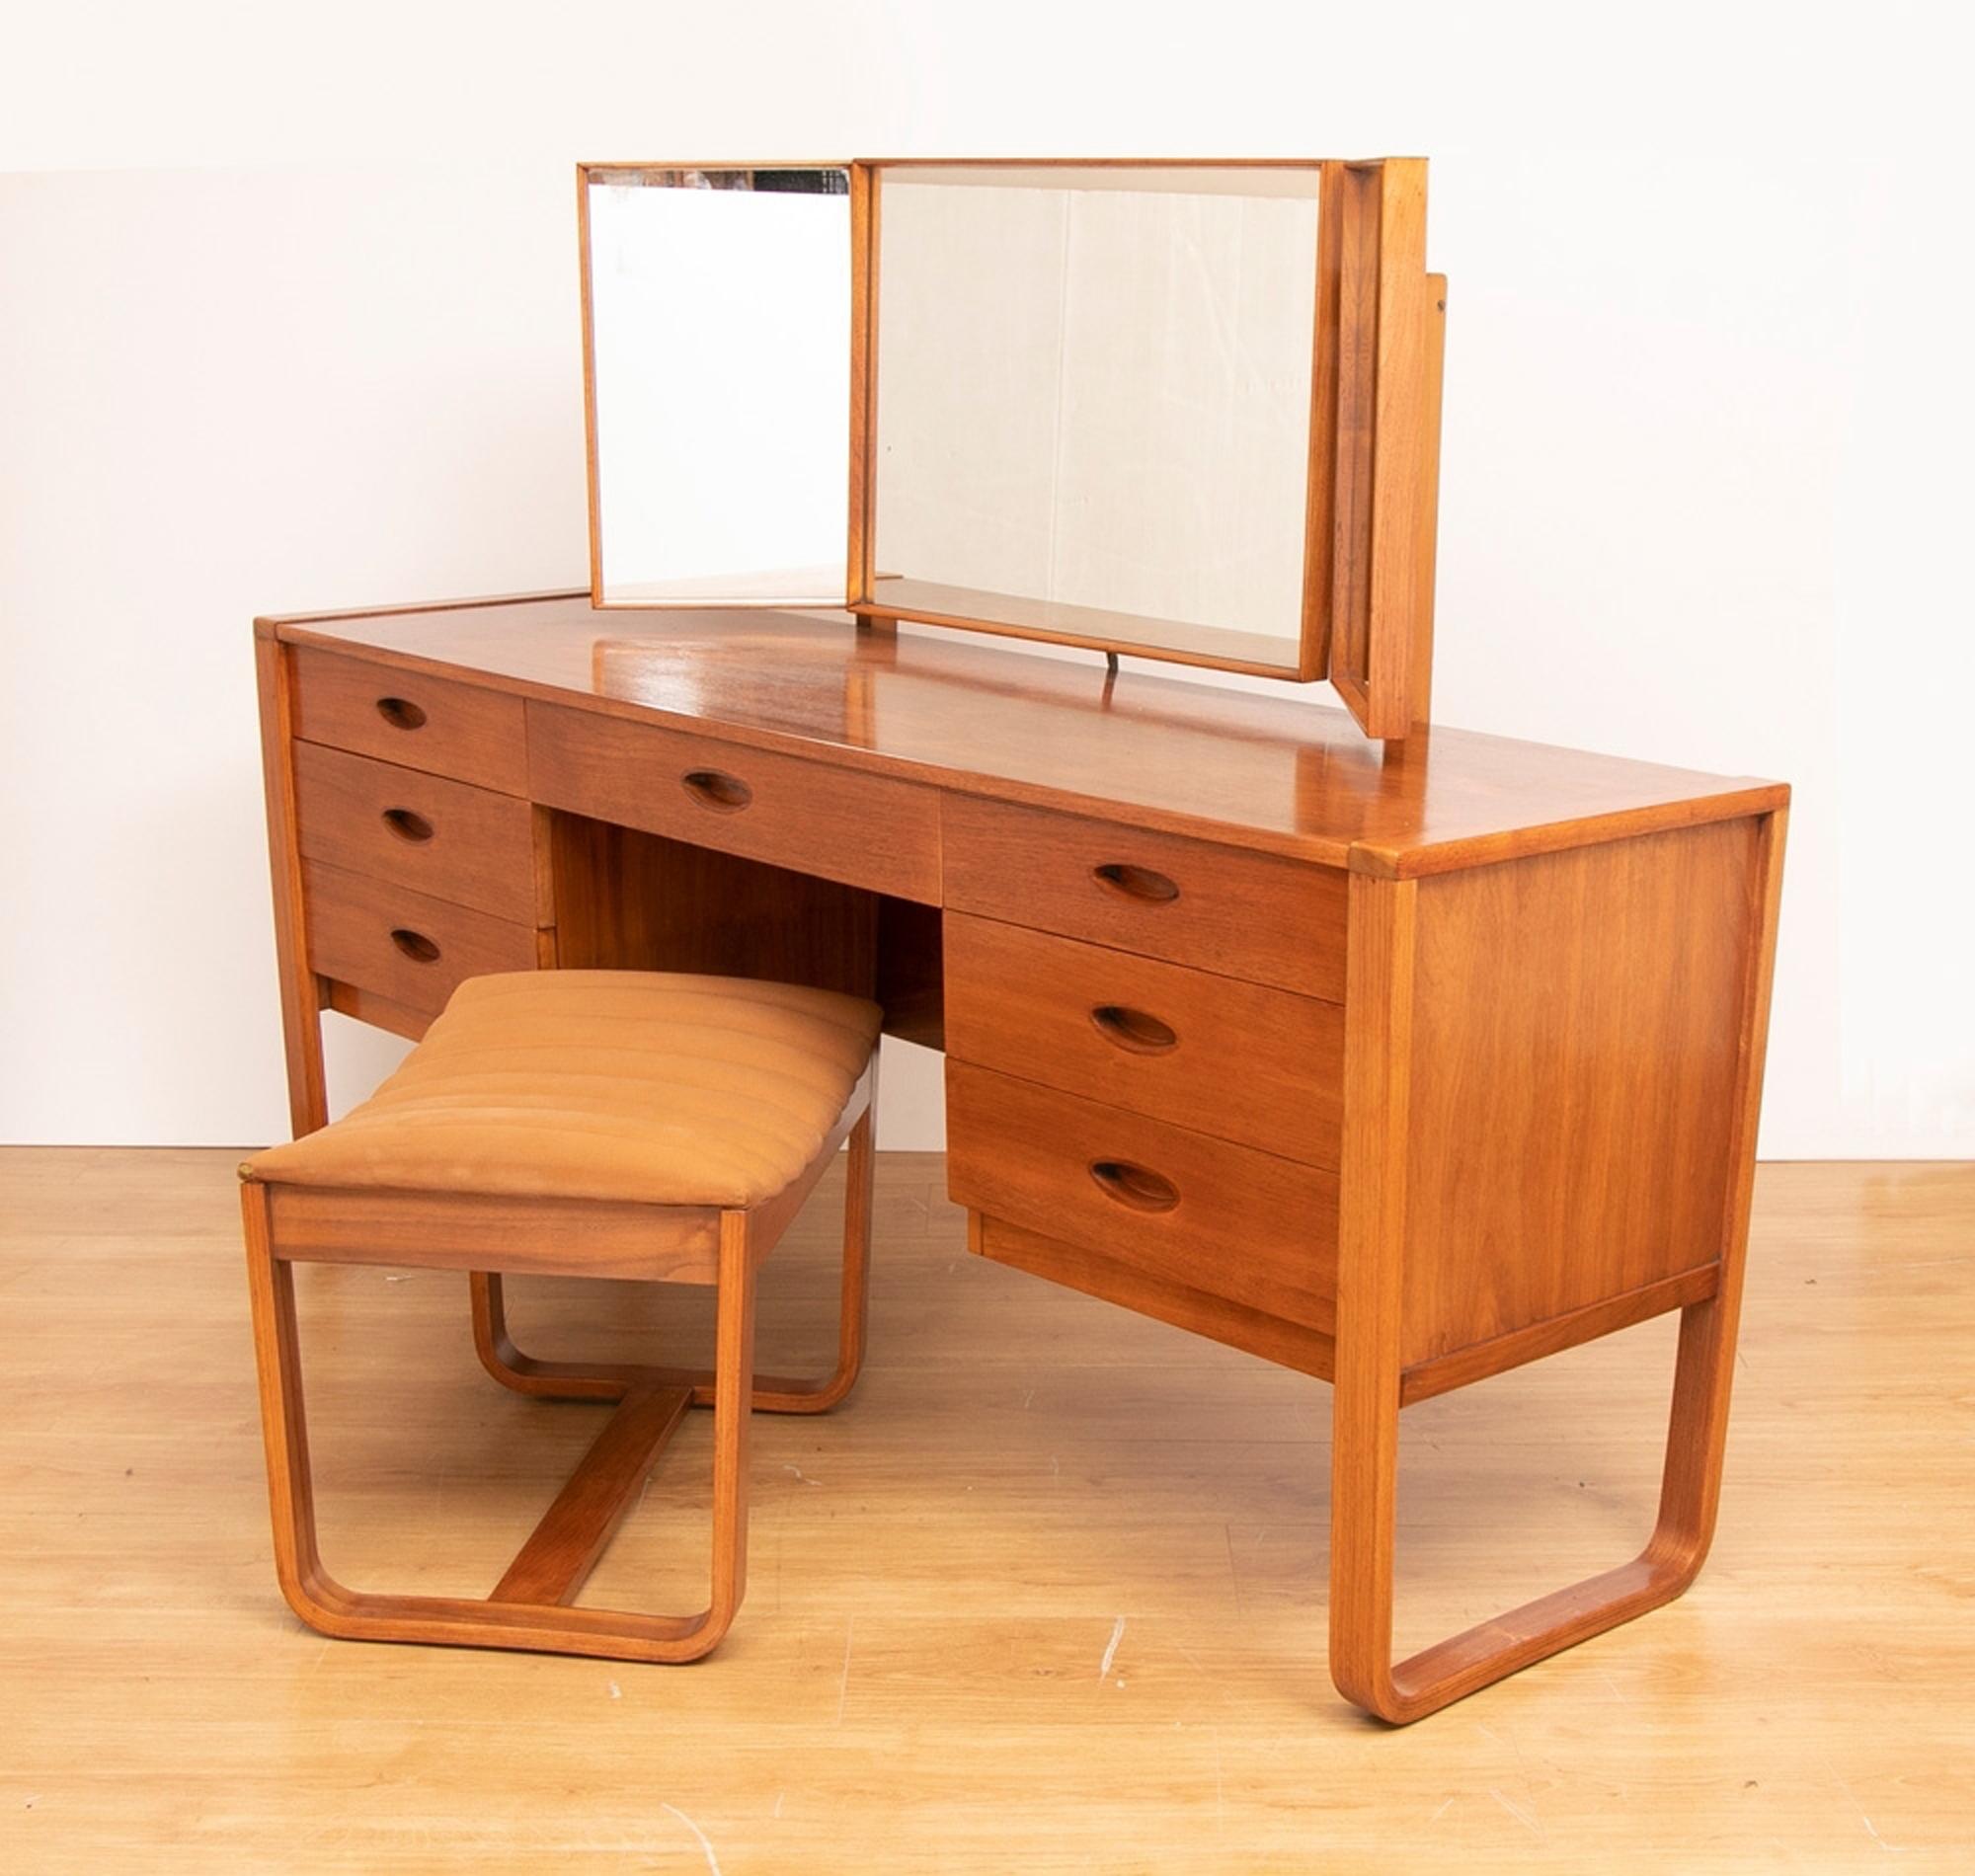 Uniflex walnut dressing table by Gunther Hoffstead
1960s walnut dressing table/desk designed in the Gunther Hoffstead for Uniflex.
It has 7 drawers and a pivoting triptych mirror. The mirrors can easily be removed to convert it into a desk.